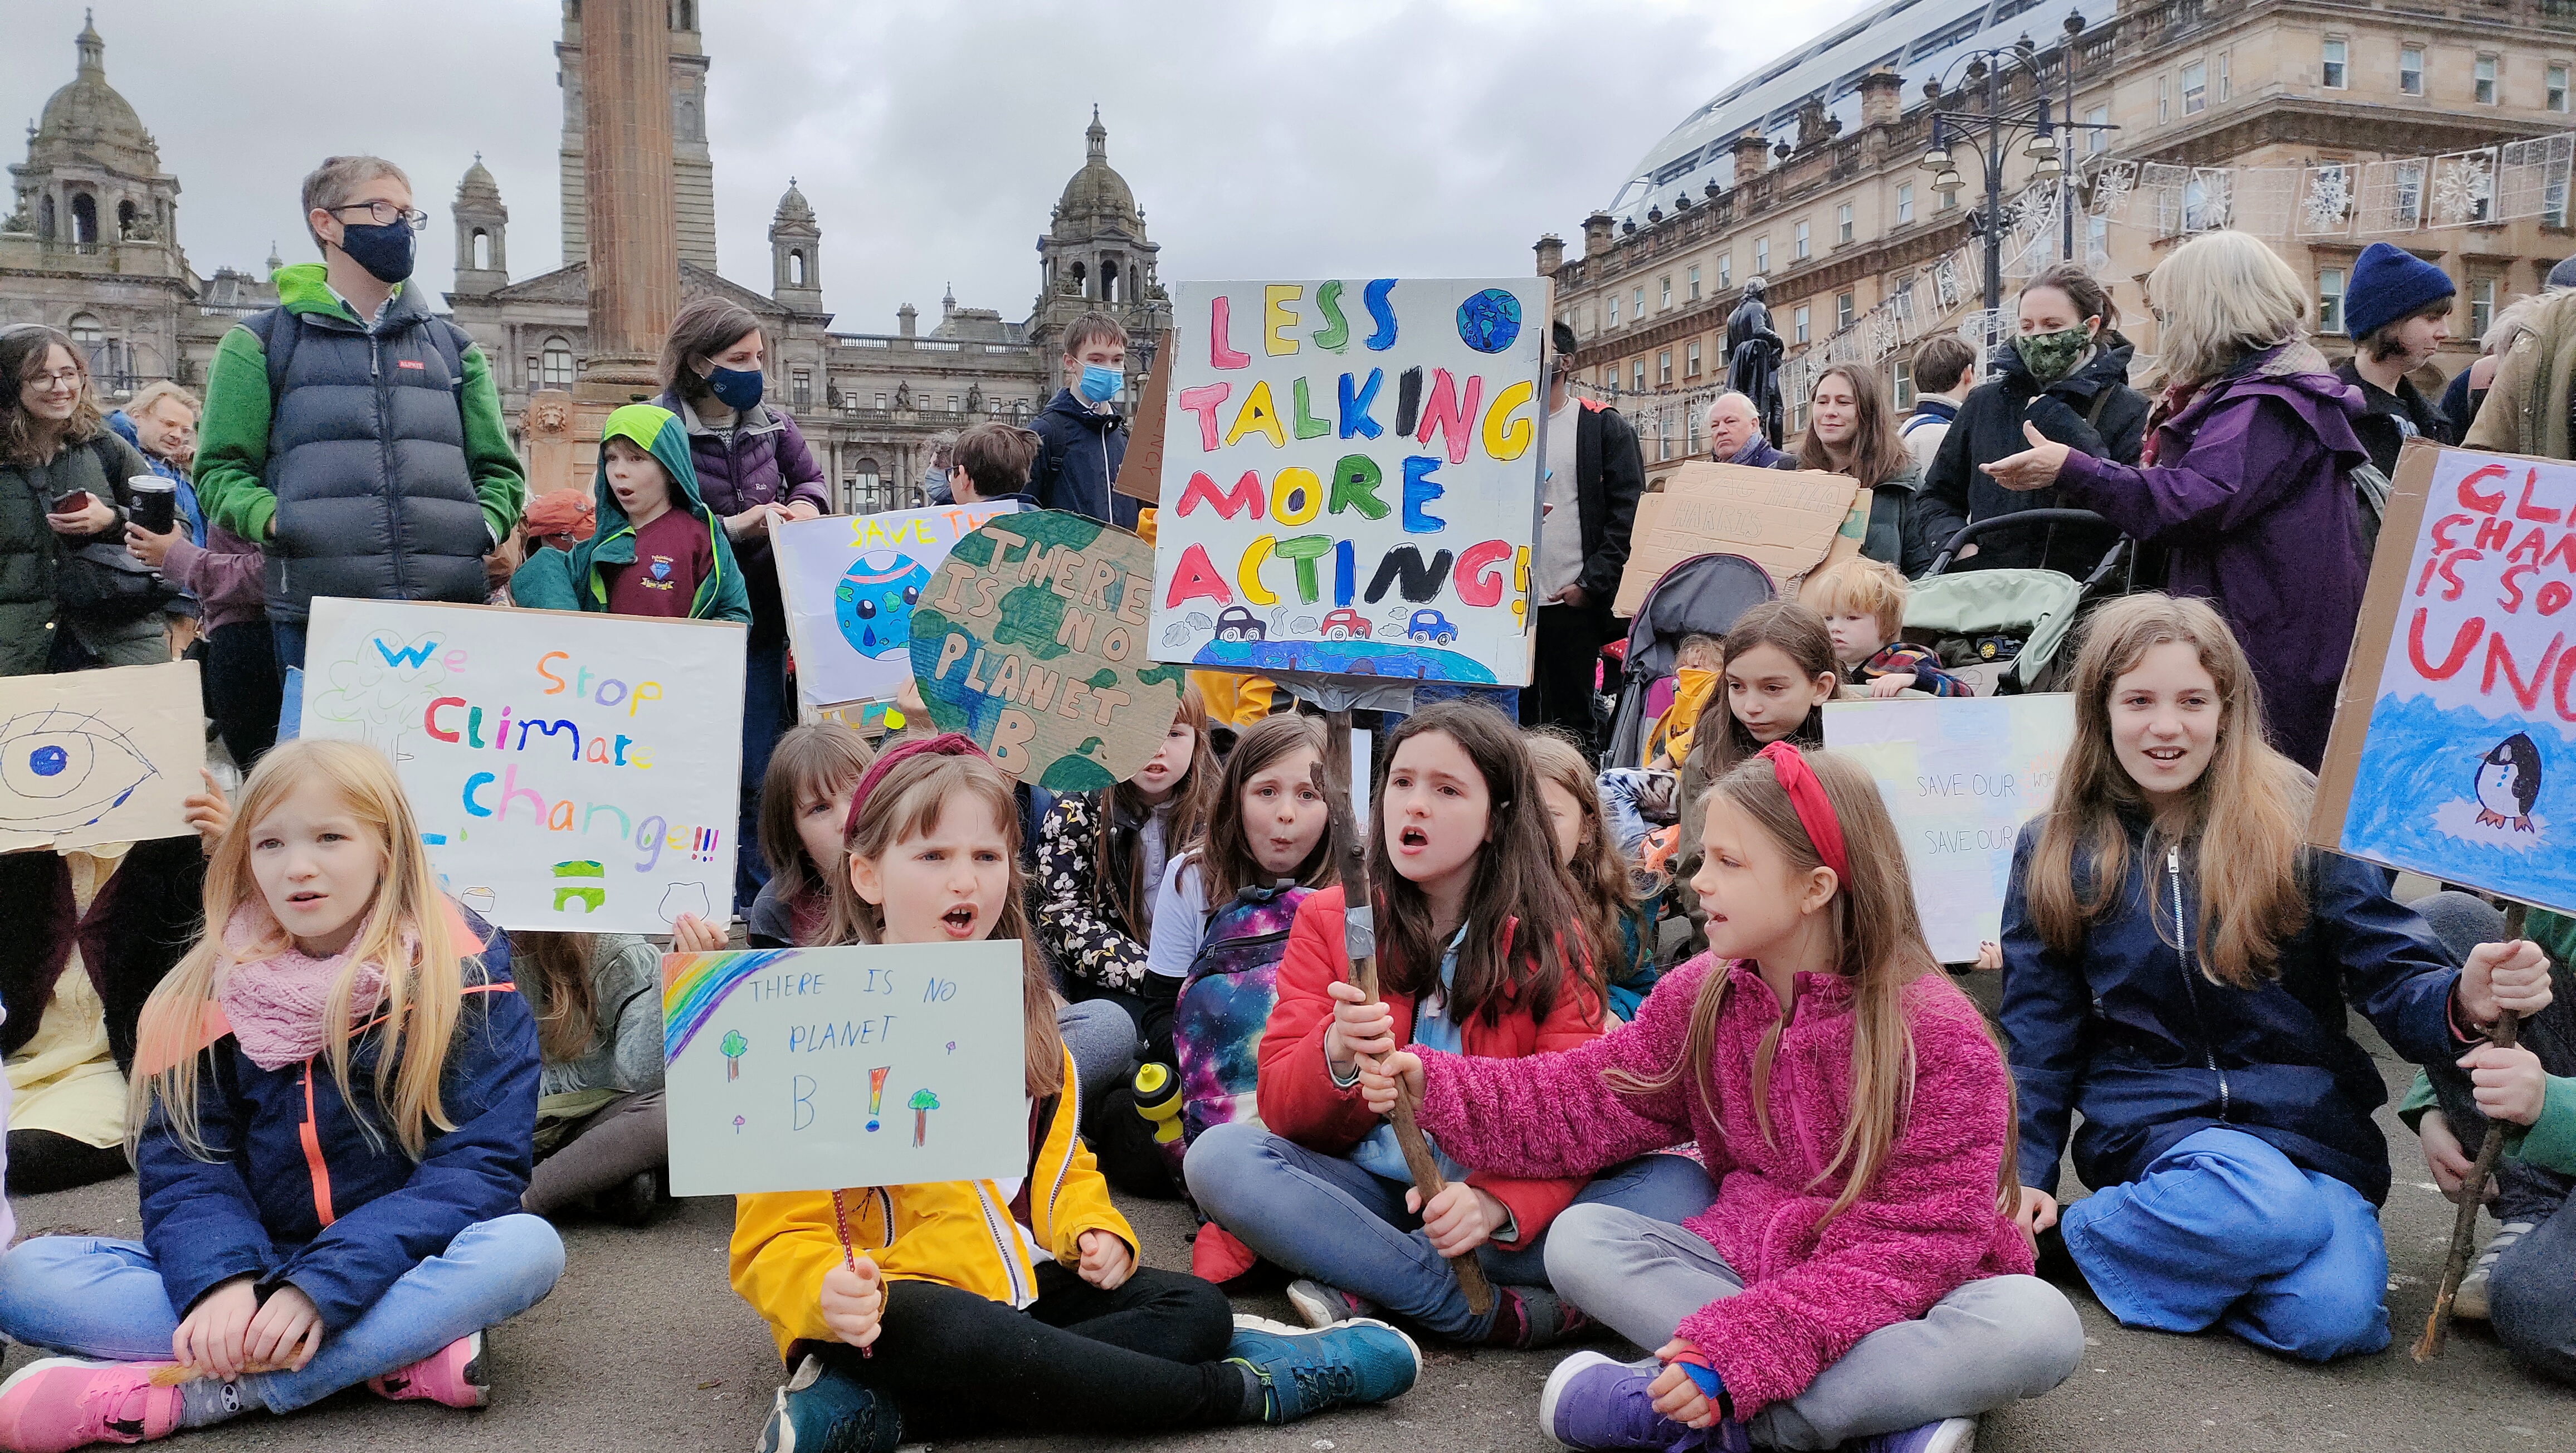 Climate activists, including hundreds of children, protest at George Square in Glasgow, demanding action on climate change from world leaders and politicians at COP26. Photo: Shamsuddin Illius